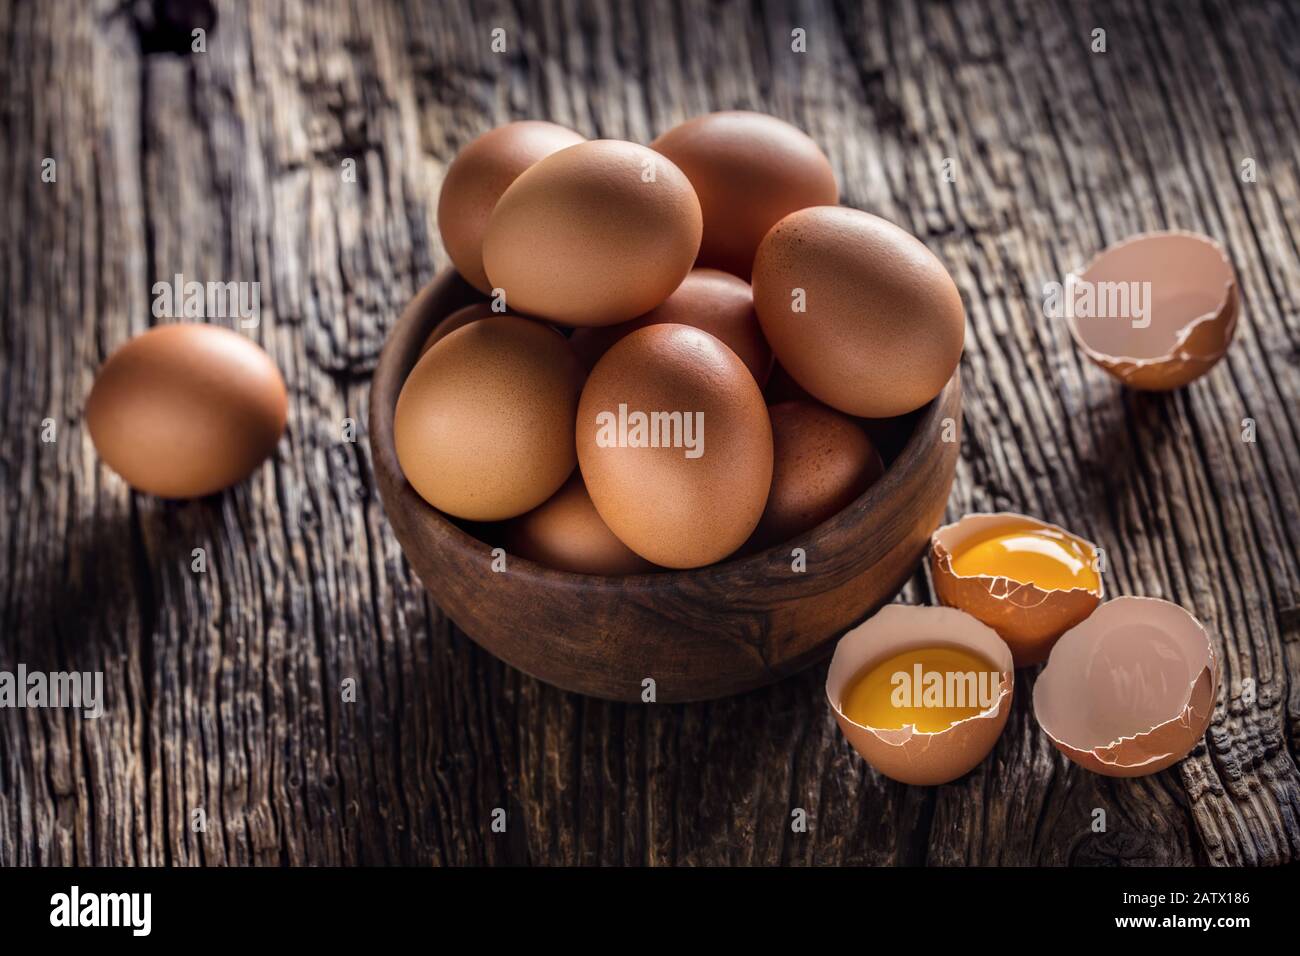 Chicken eggs in wooden bowl on rustic oak table Stock Photo